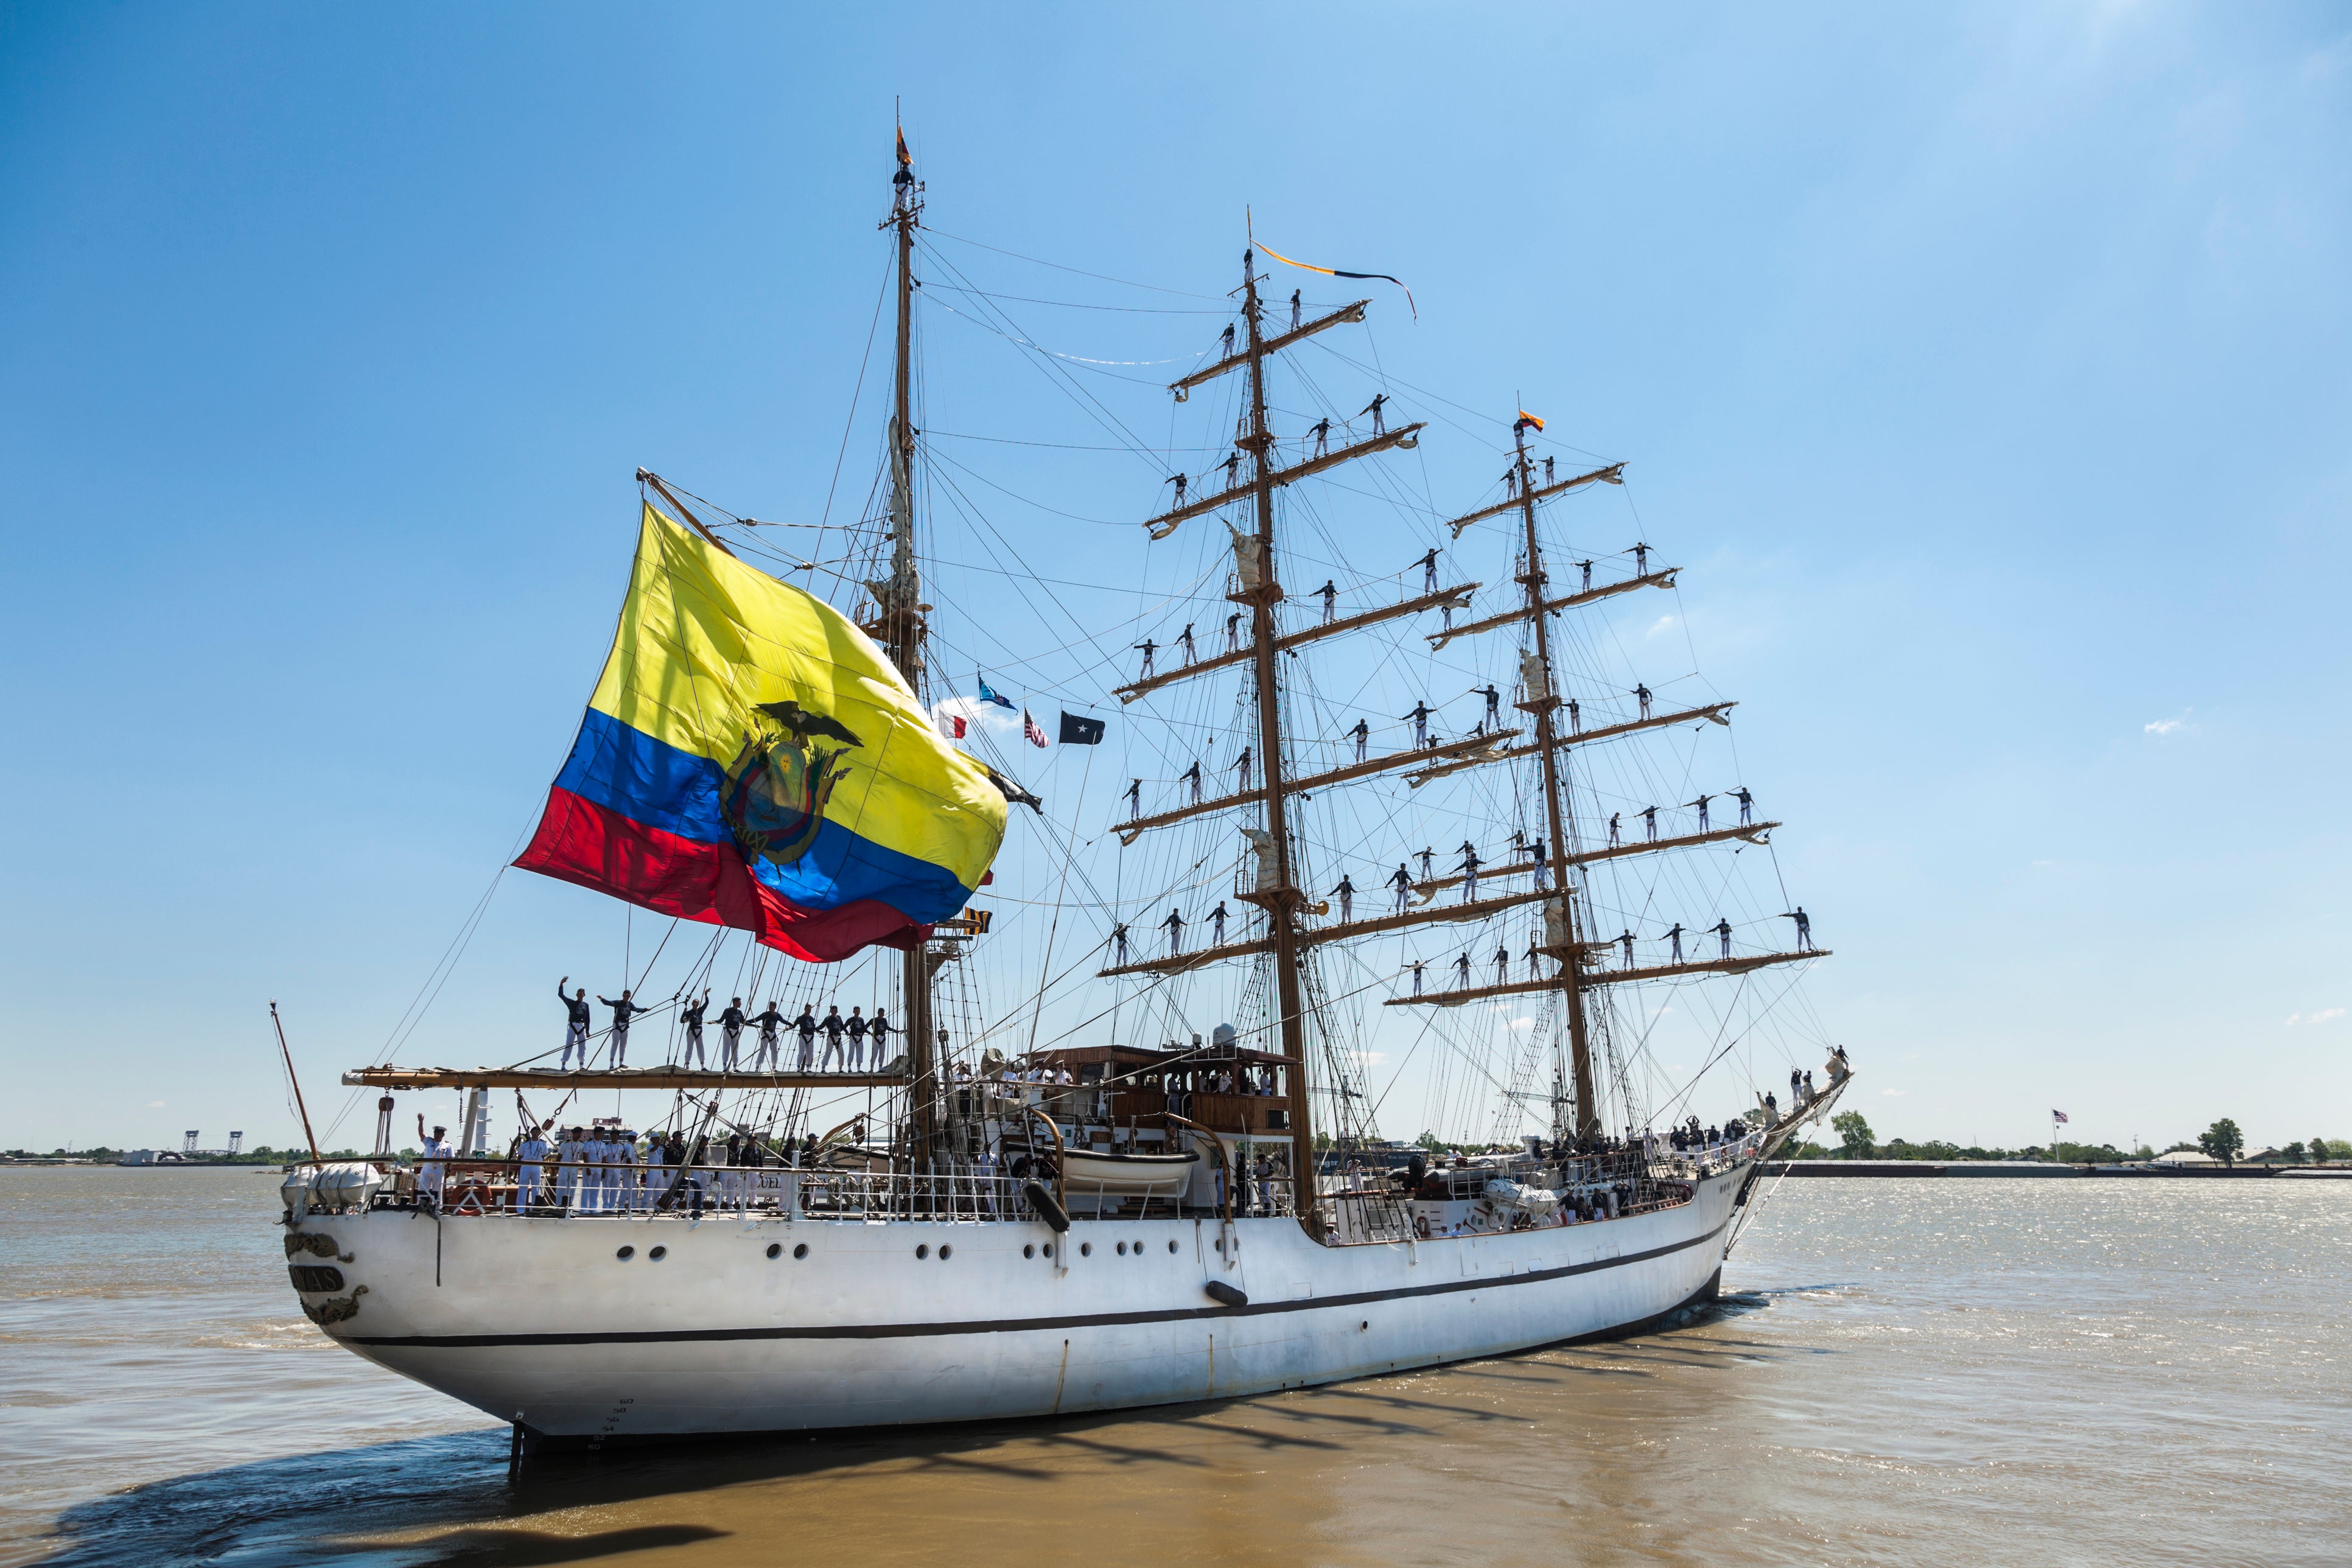 The Ecuadoran Navy tall ship Guayas in the Mississippi river in 2012